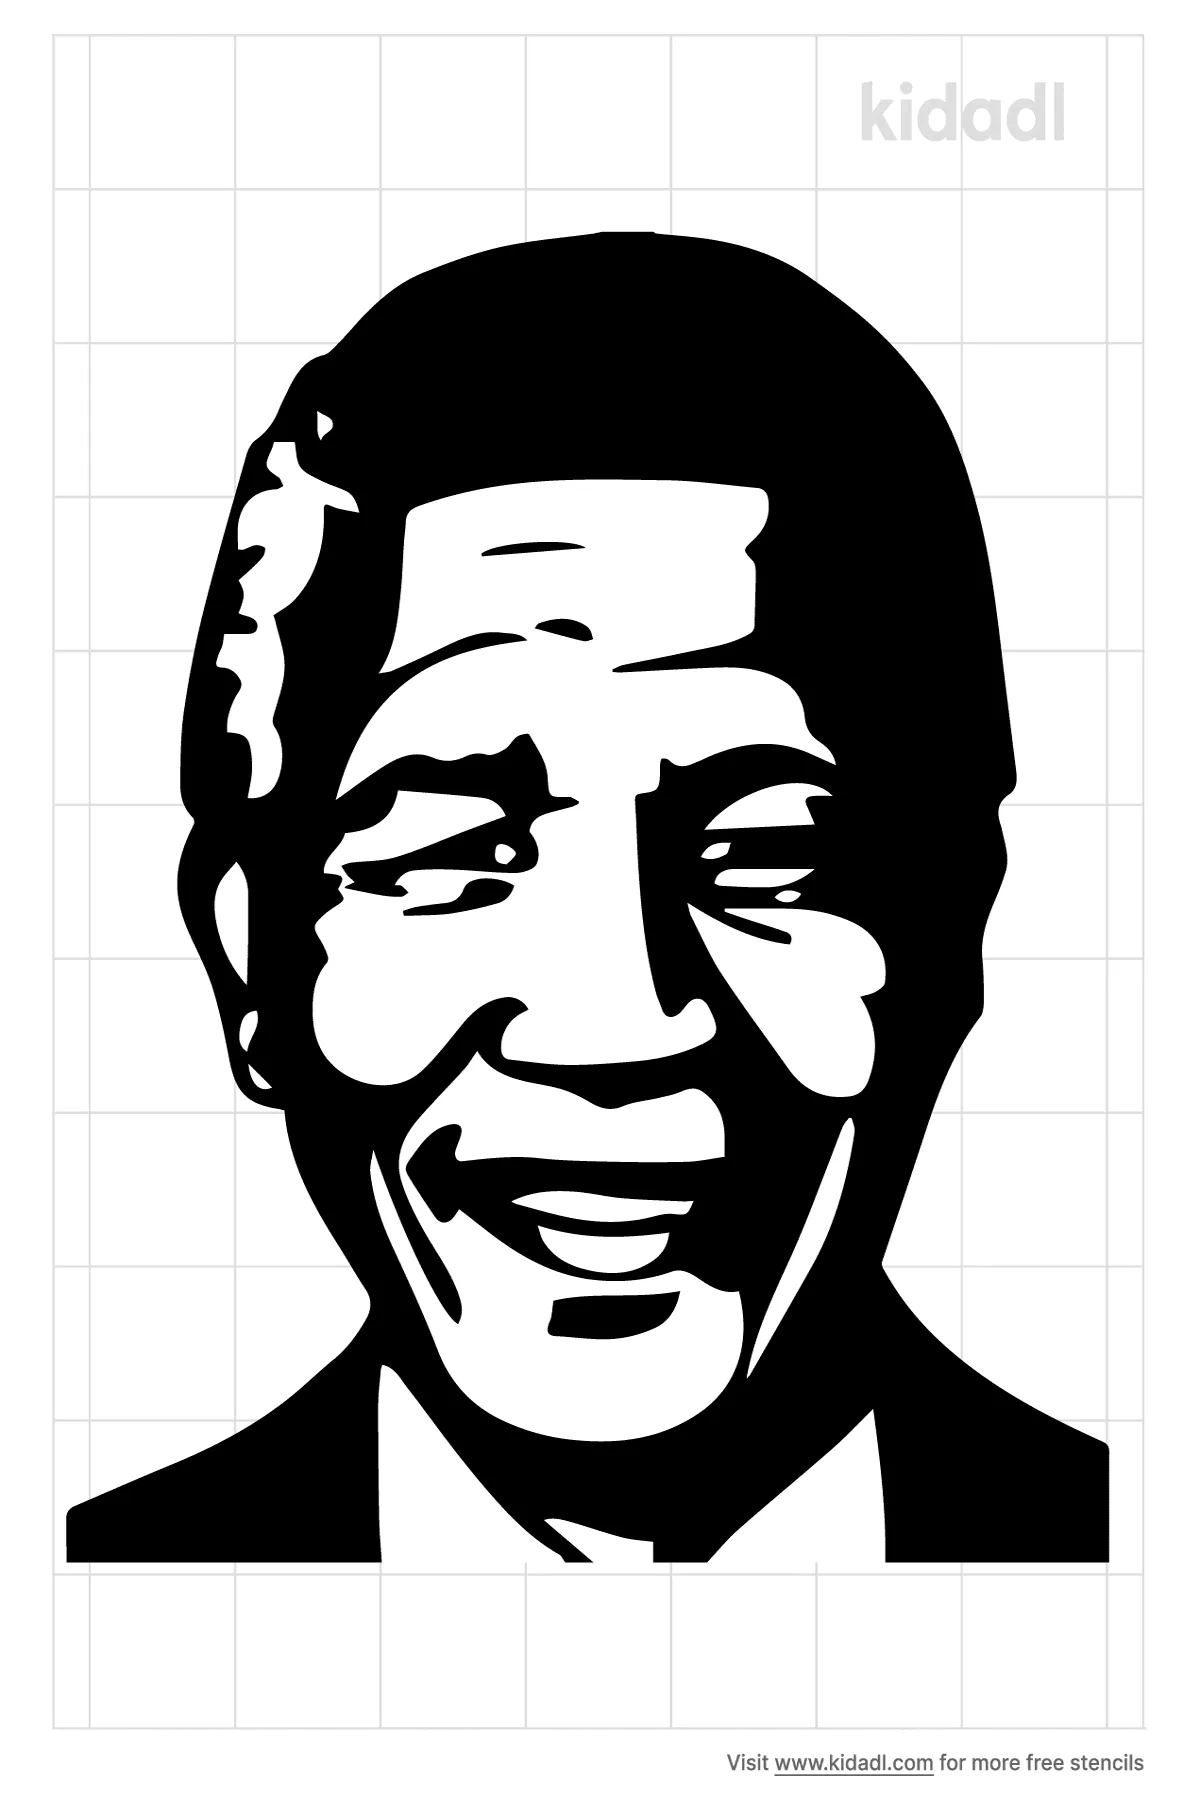 nelson mandela coloring pages